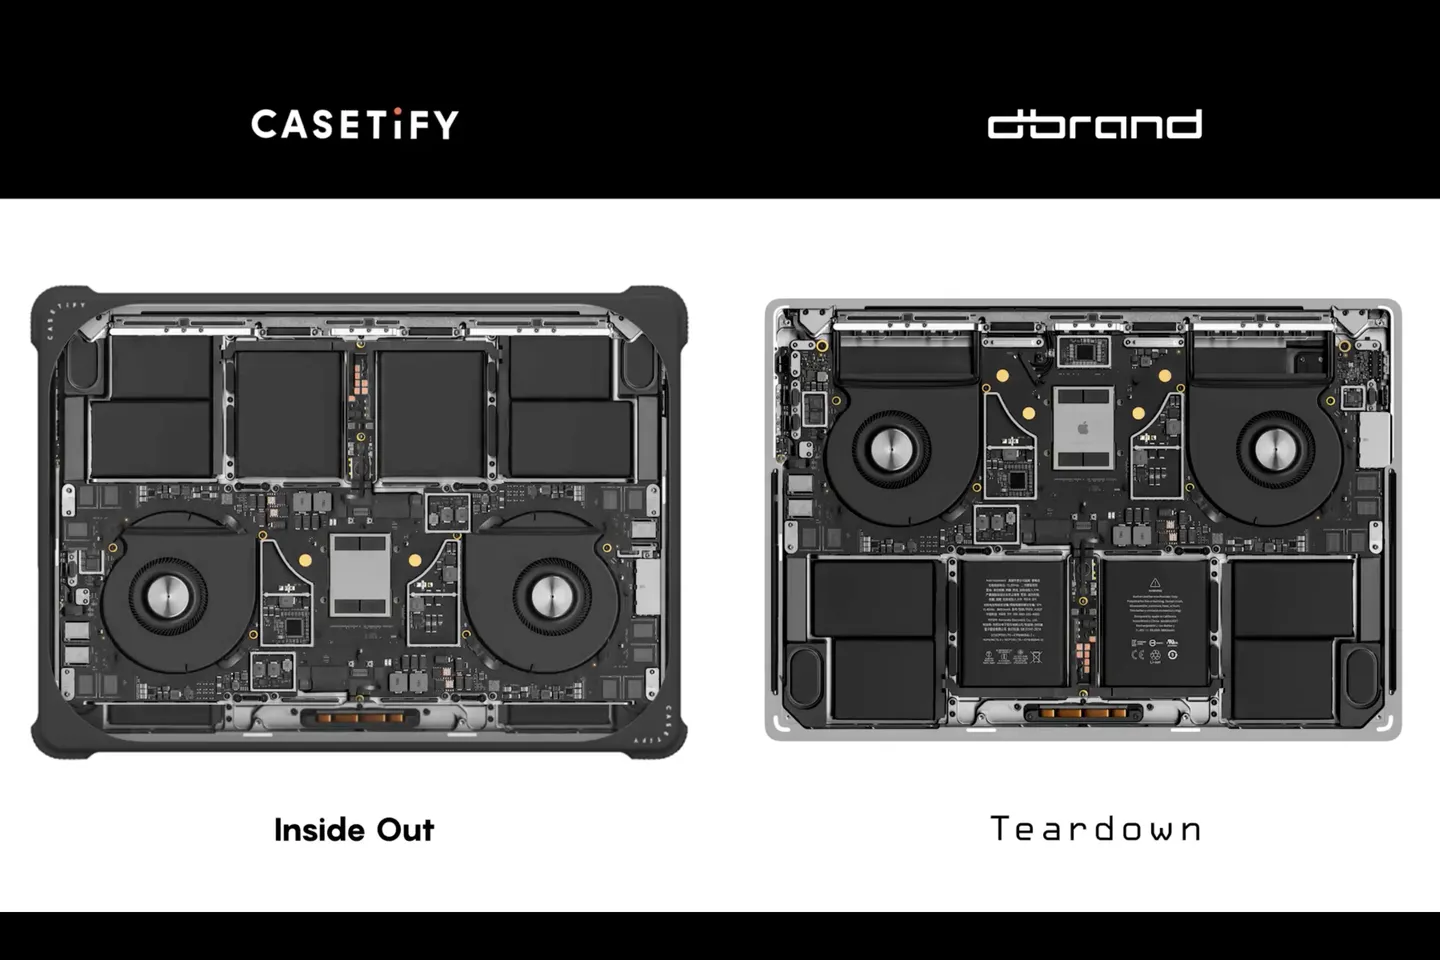 Dbrand takes legal action against Casetify for allegedly stealing its Teardown designs – The TechLead